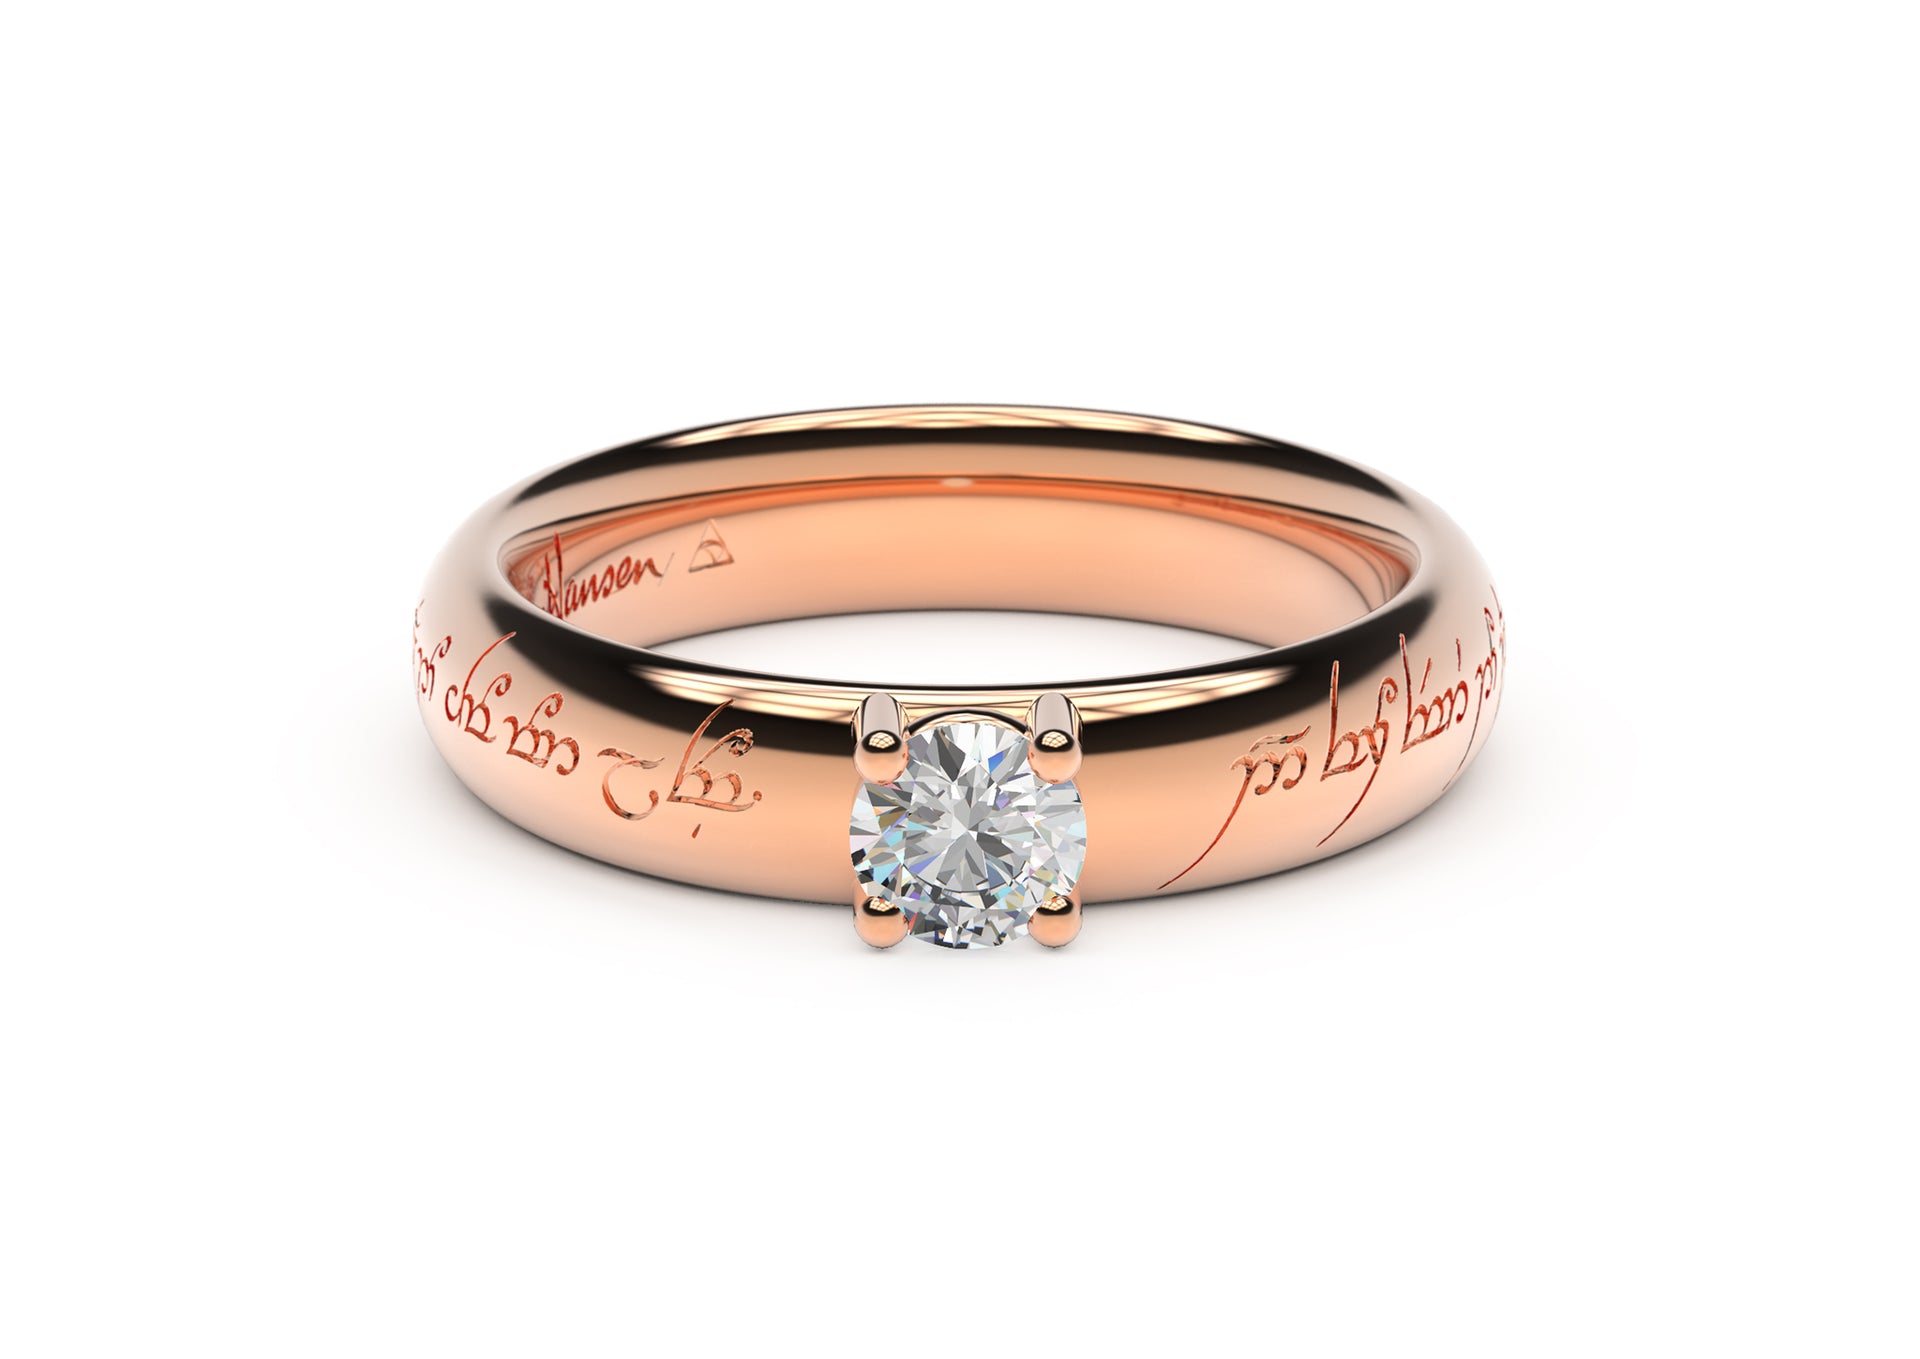 Contemporary Elvish Engagement Ring, Red Gold